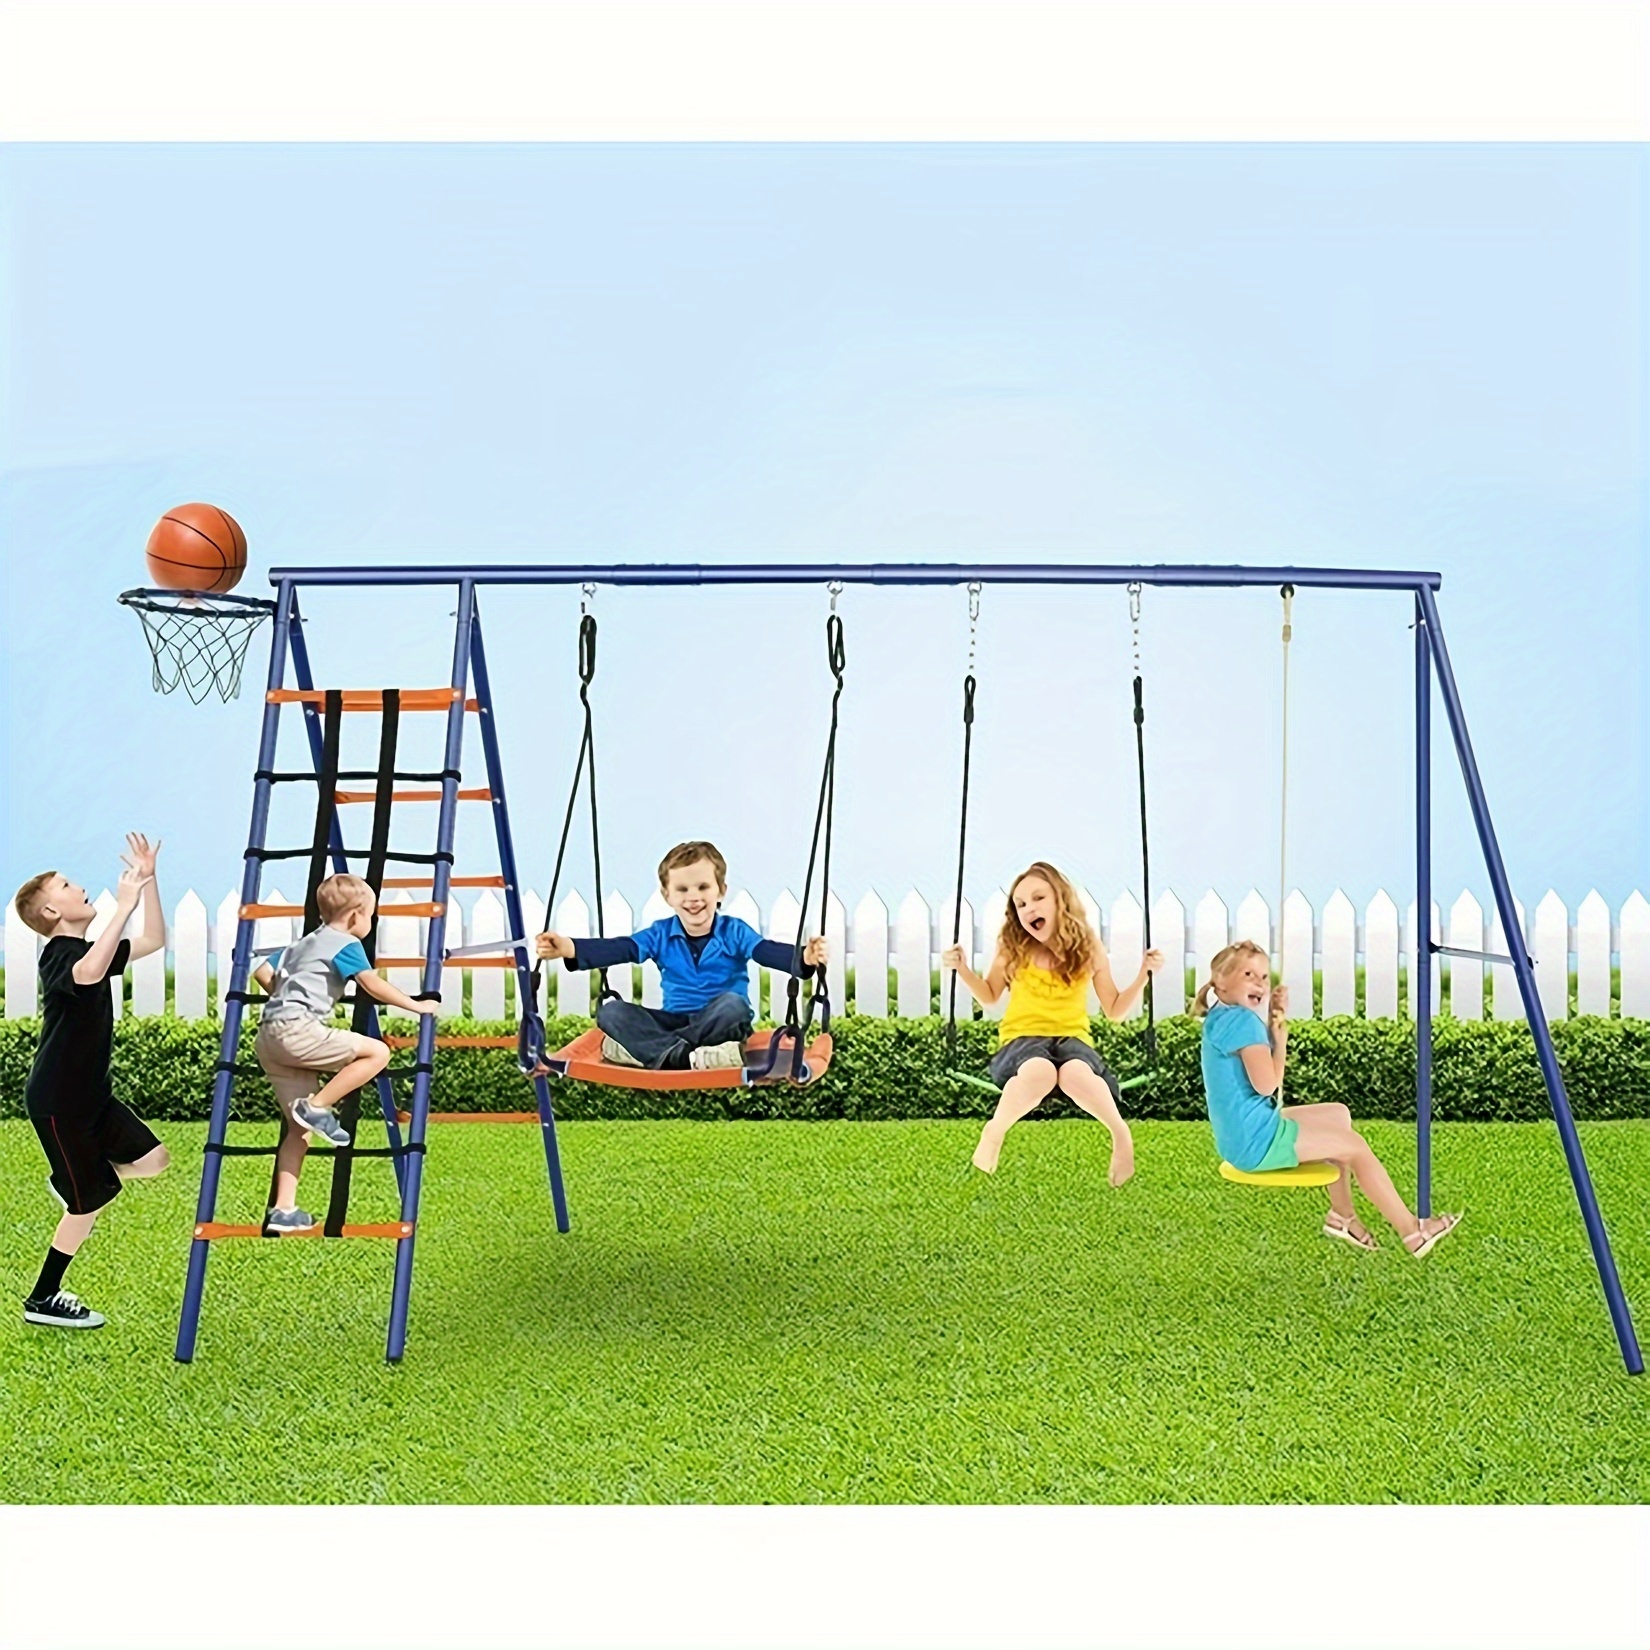 

6-in-1 For Outside, 550lbs Heavy Duty A-frame Outdoor Swing Set, Adjustable Kids Seat/ground Stakes For Backyard